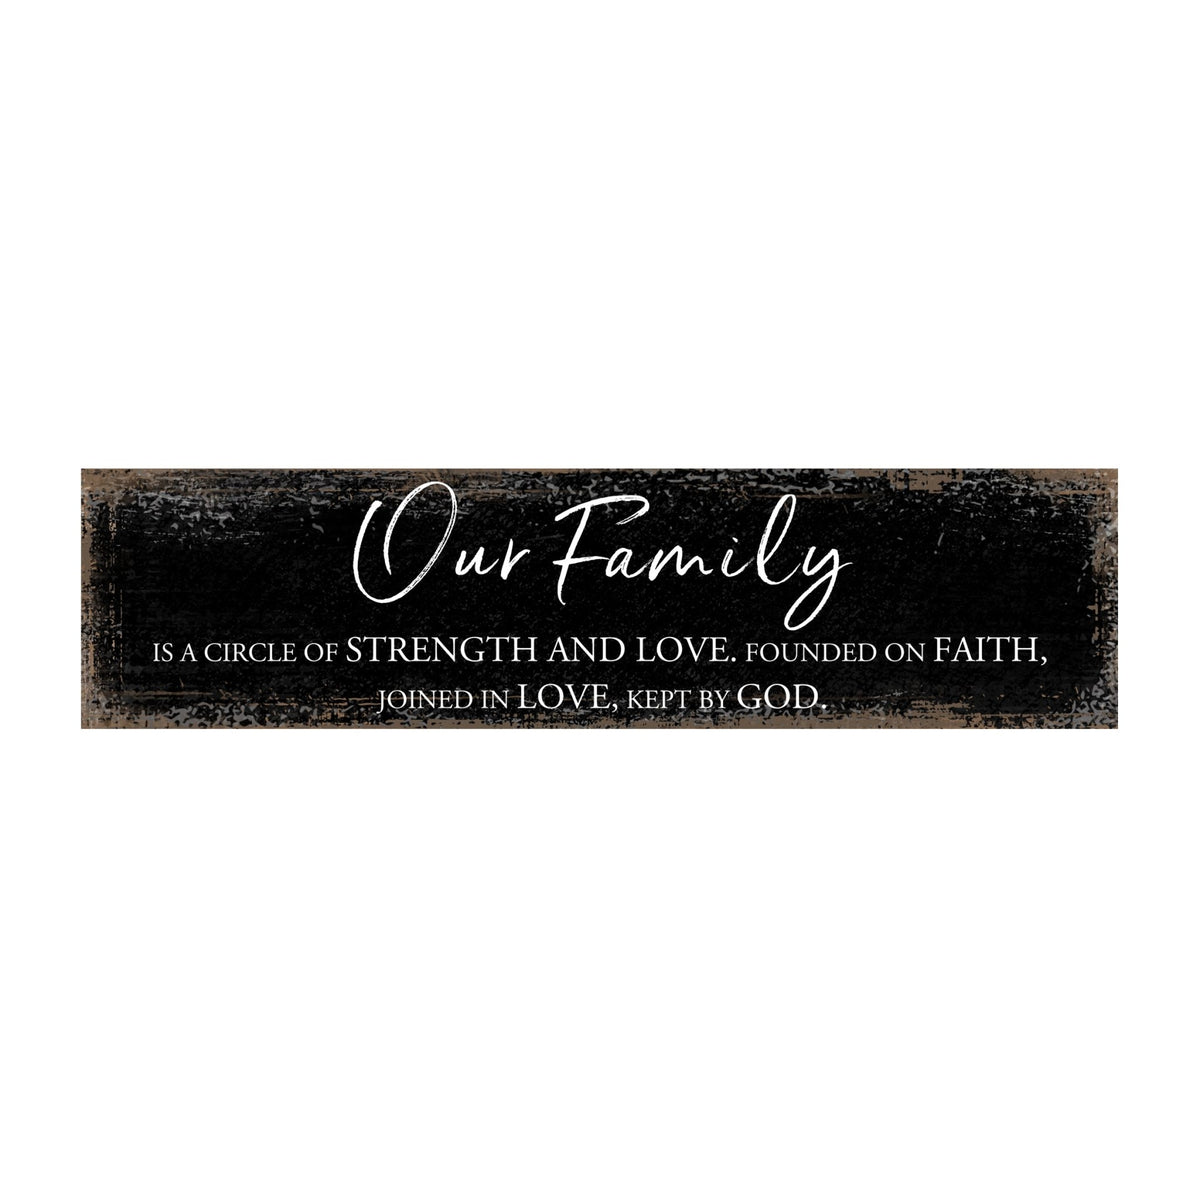 Modern Inspirational Wooden Wall Art Hanging Plaque 10x40 – Our Family – for Family and Home Decoration - LifeSong Milestones